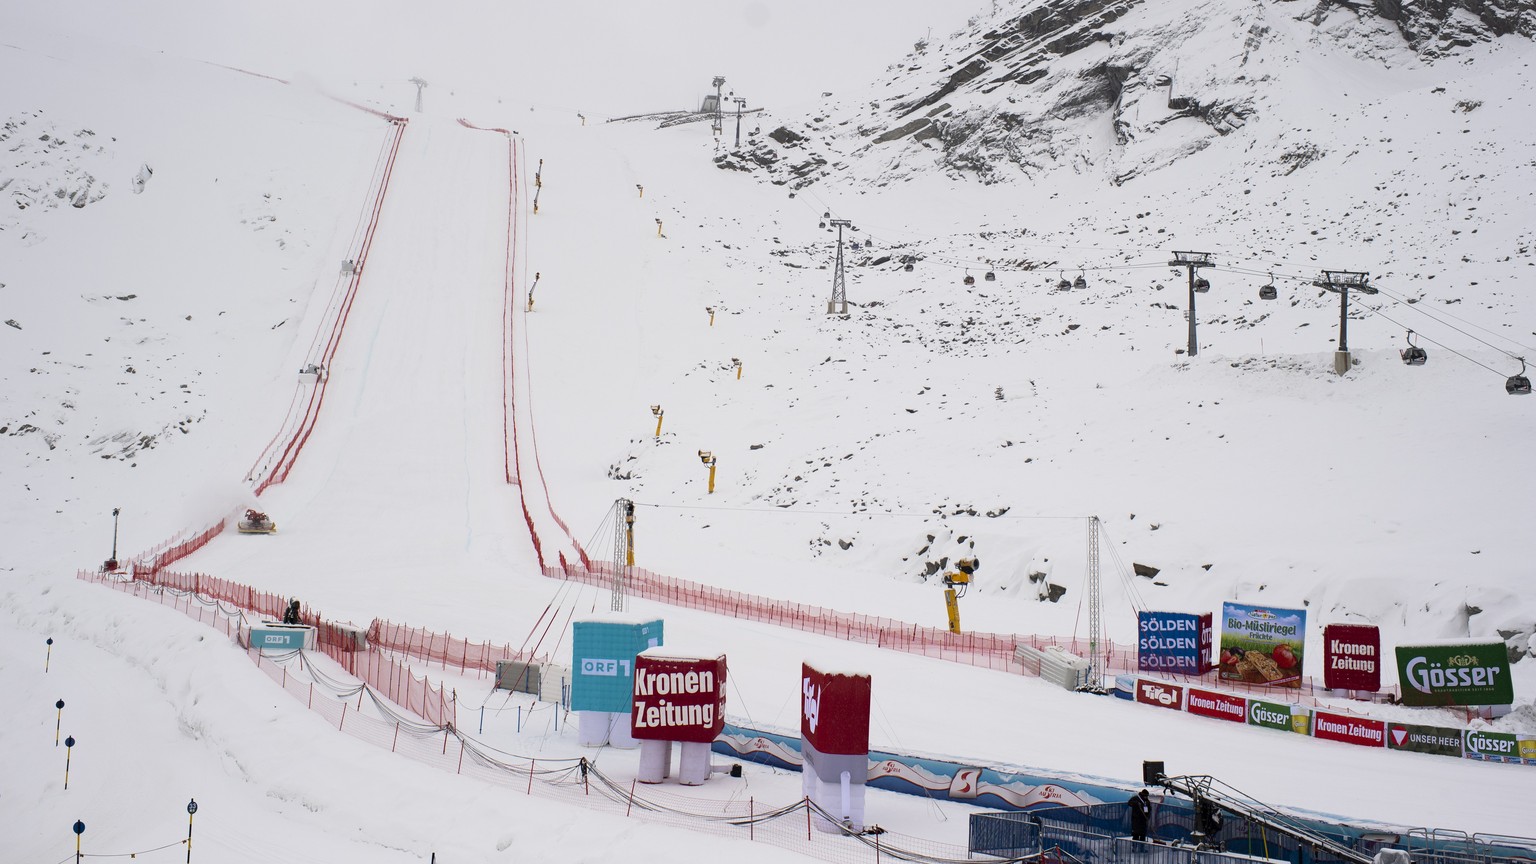 epa08749398 General view of the finishing area at the FIS Alpine Ski World Cup season in Soelden, Austria, 16 October 2020. The FIS Alpine Skiing World Cup season 2020/2021 will be traditionally opene ...